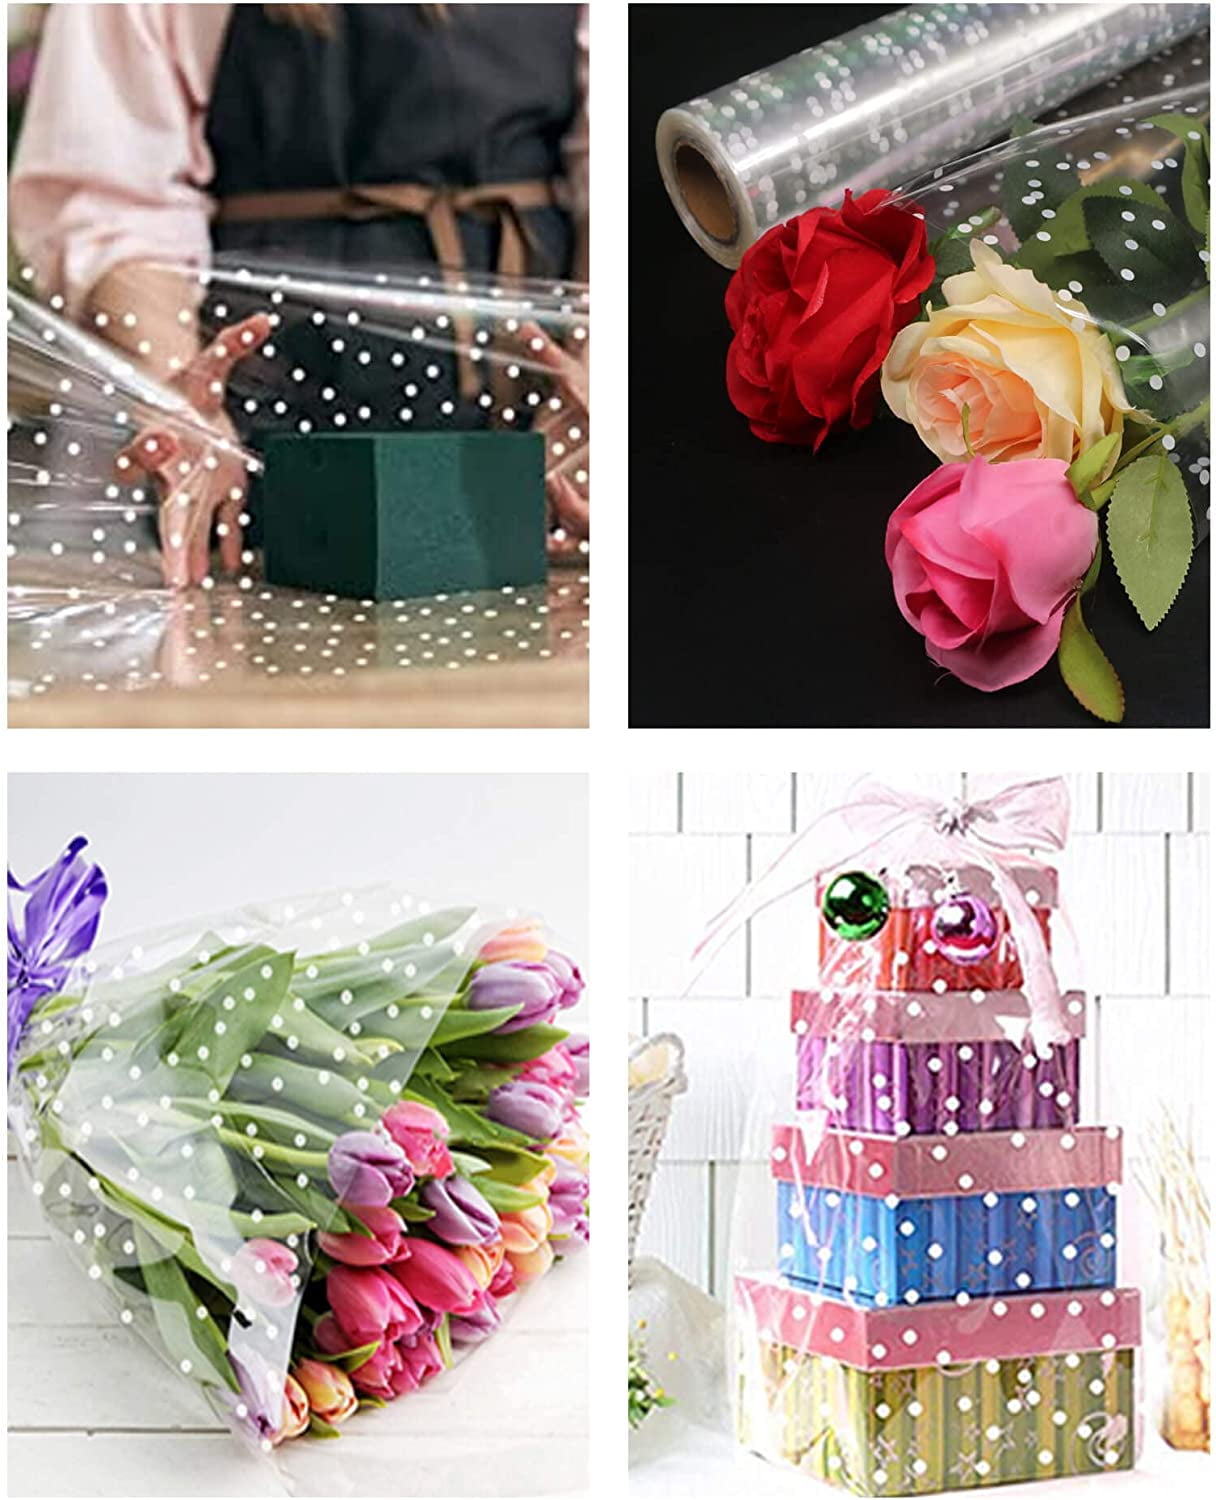 Nuolux Film Wrapping Gift Cellophane Iridescent Paper Flower Candy Sheet Roll Treats Package Bouquet Paper Bags Baskets Wrapper, Size: 23.62 x 1.57 x 1.57